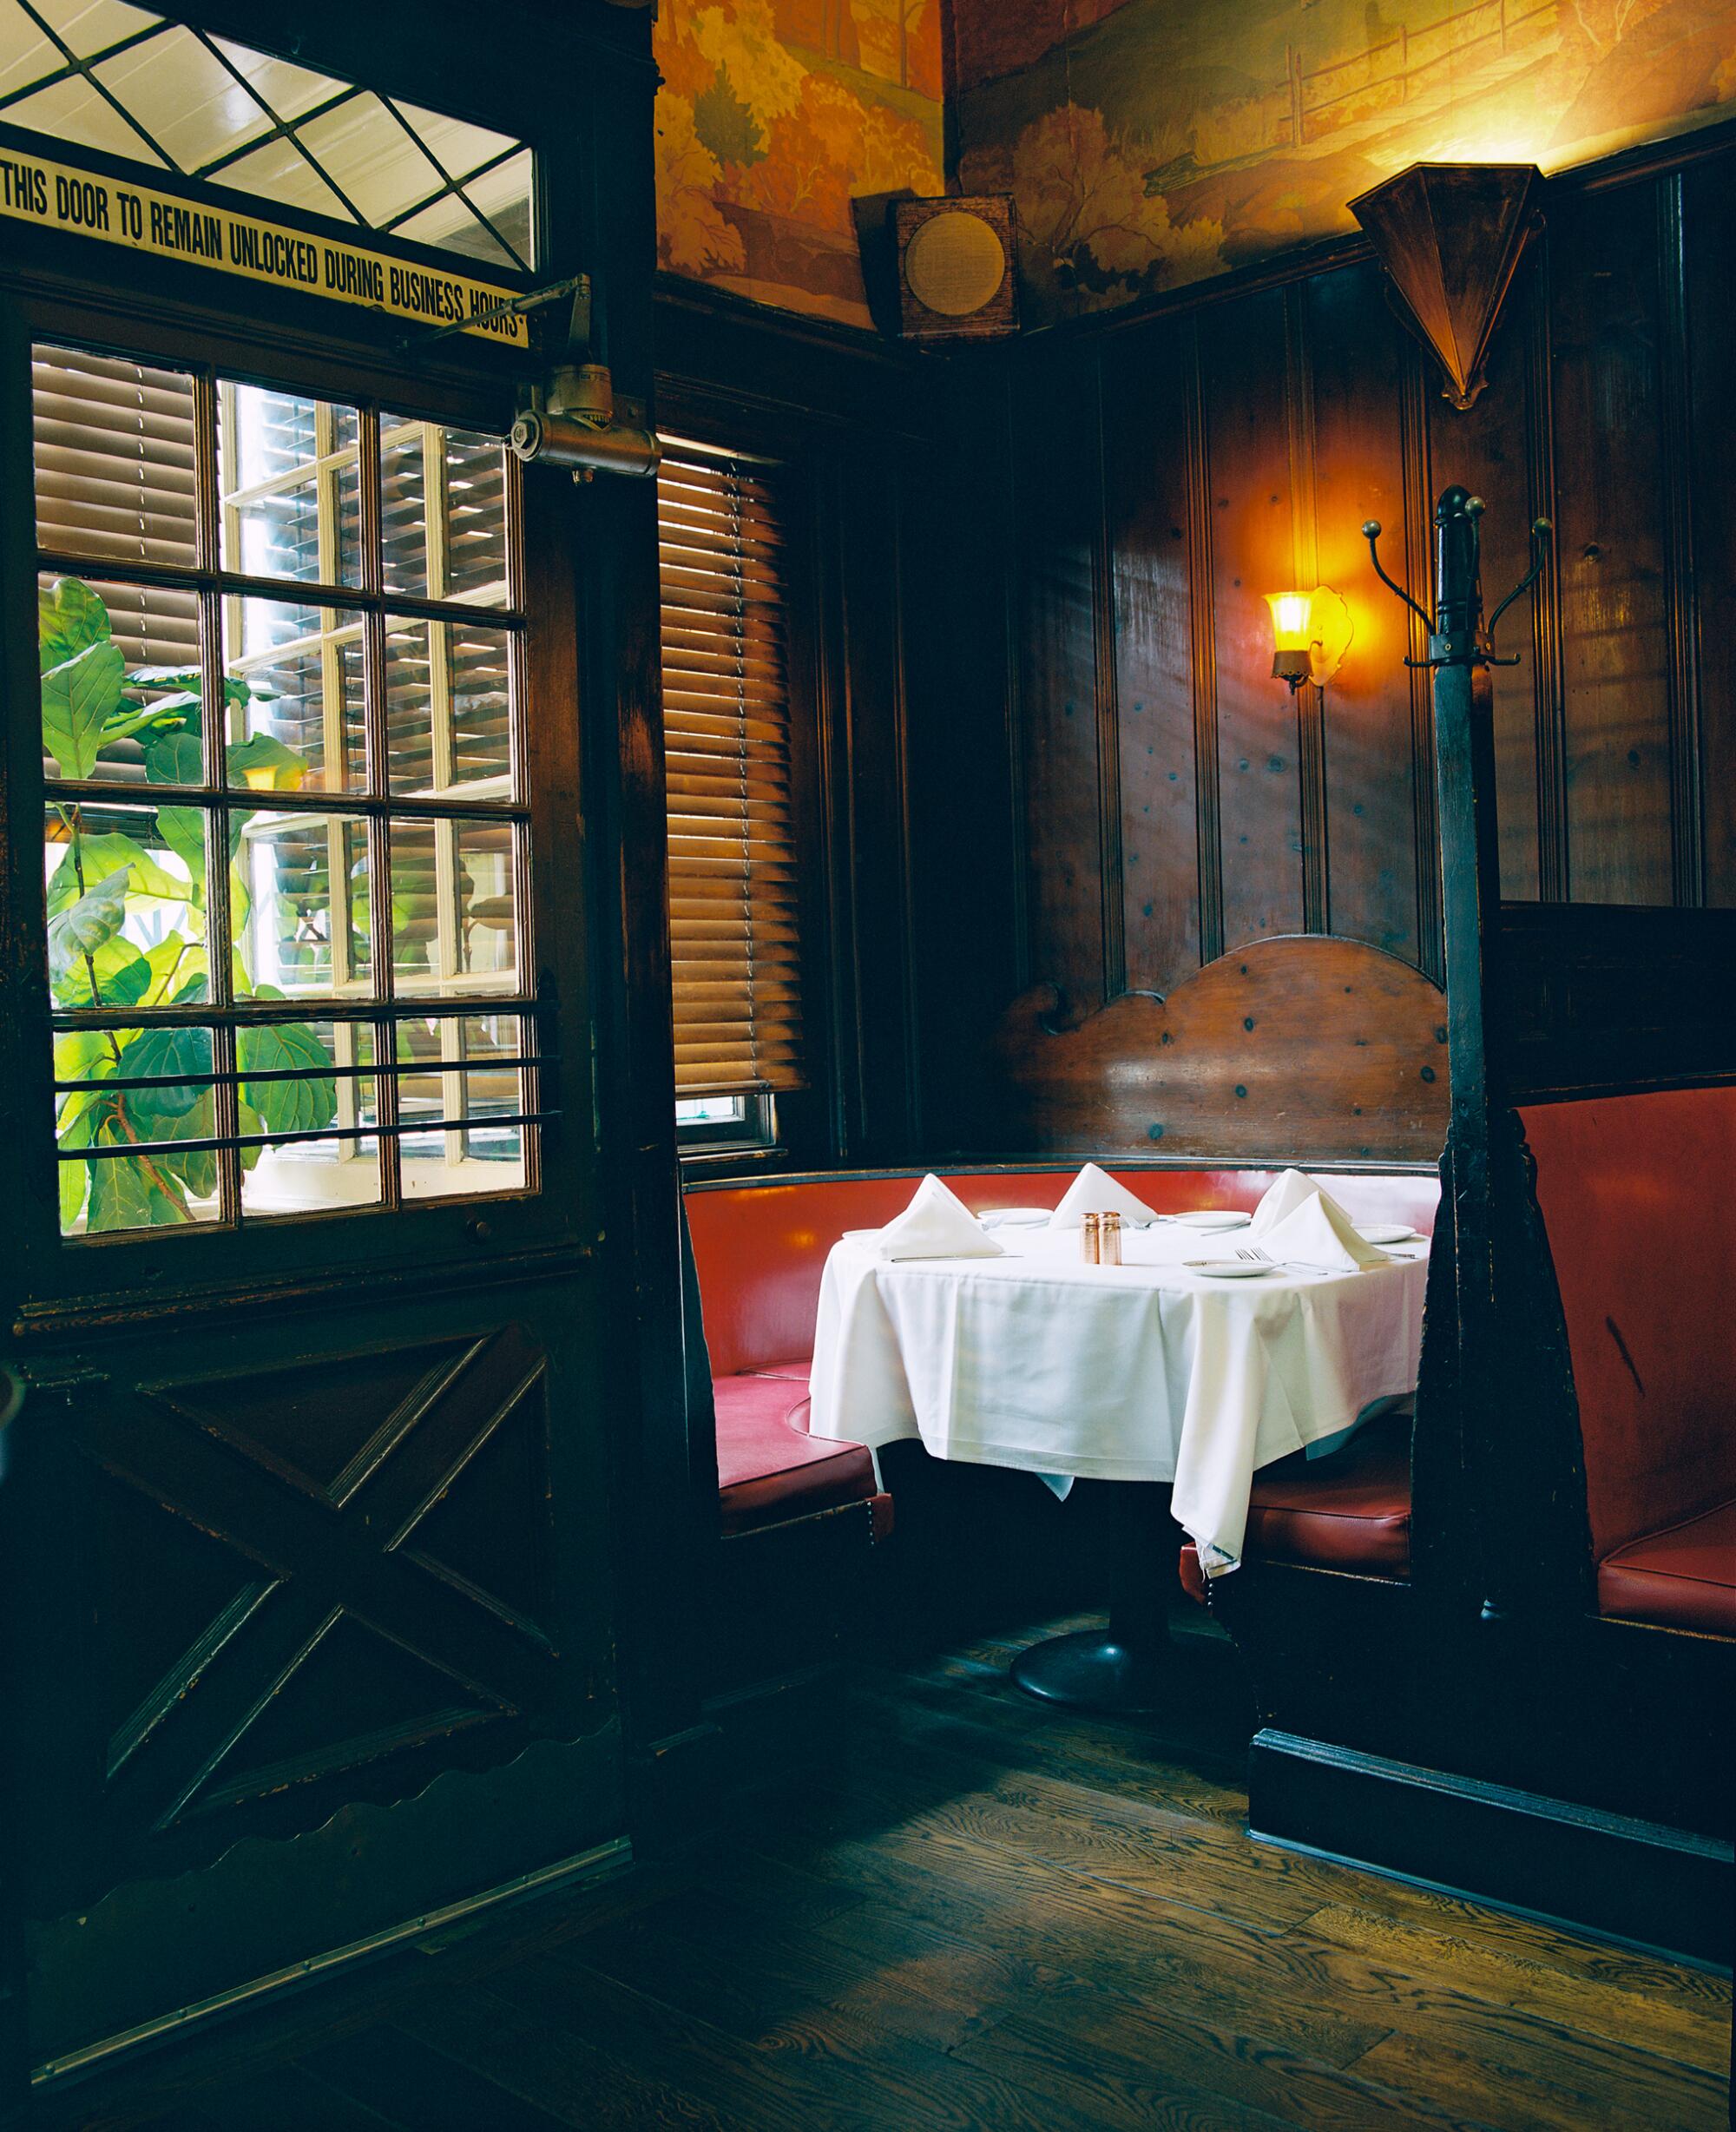 Restaurant booth controversies  Restaurant-ing through history